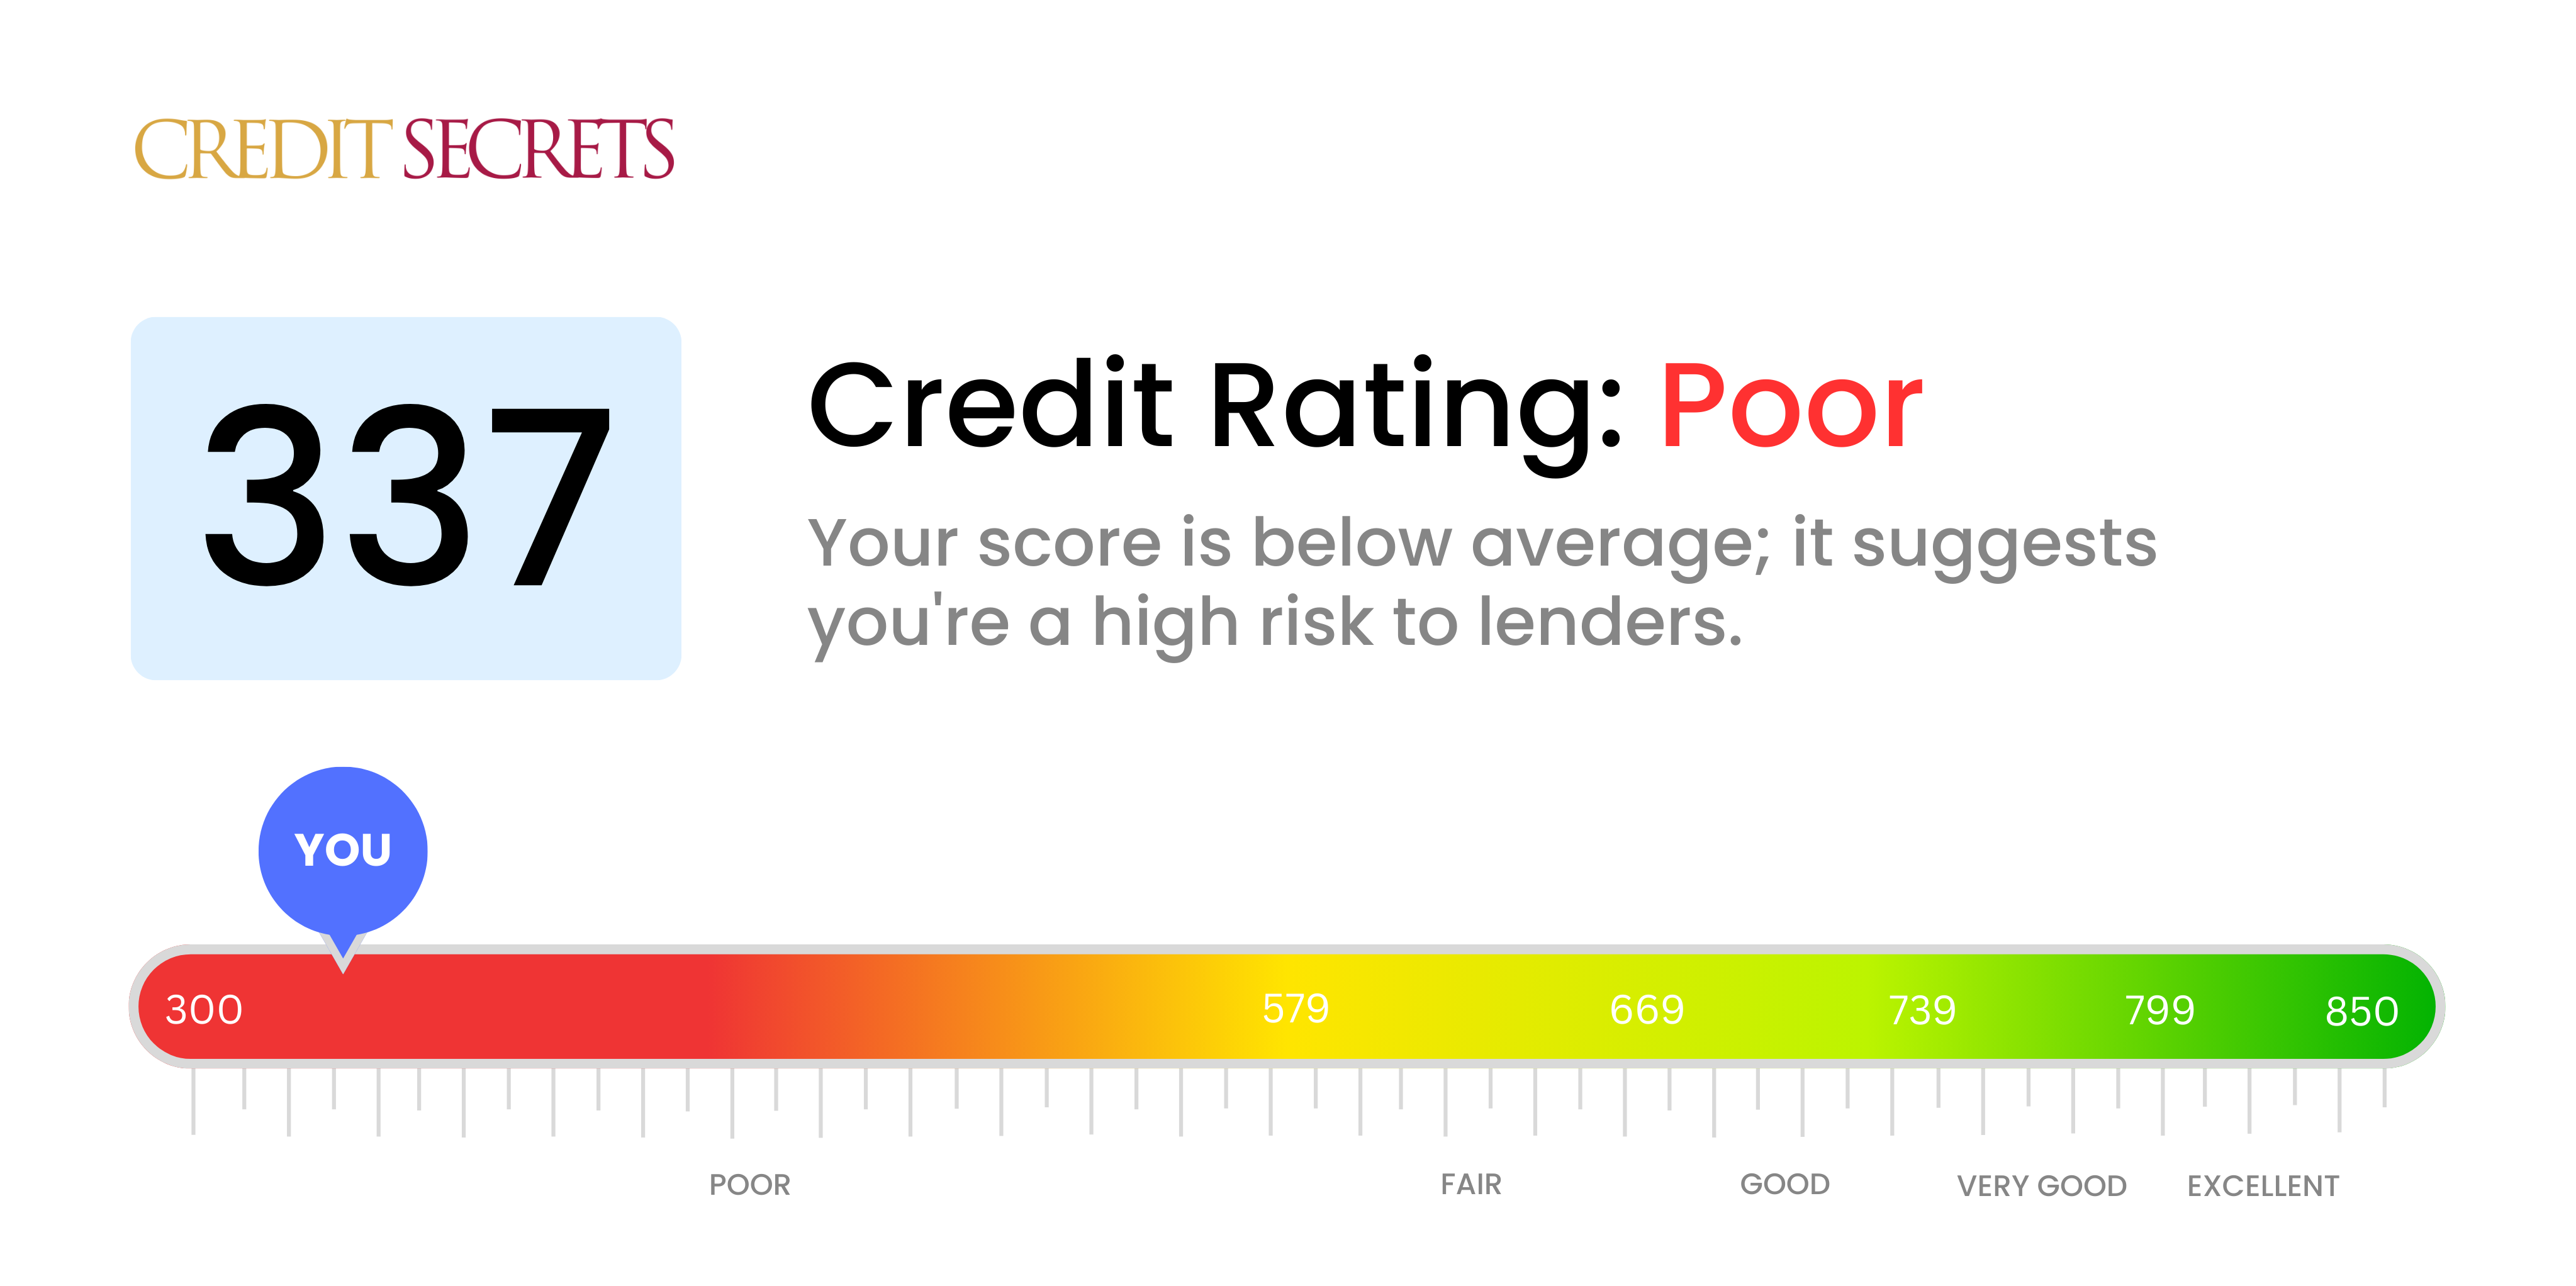 Is 337 a good credit score?